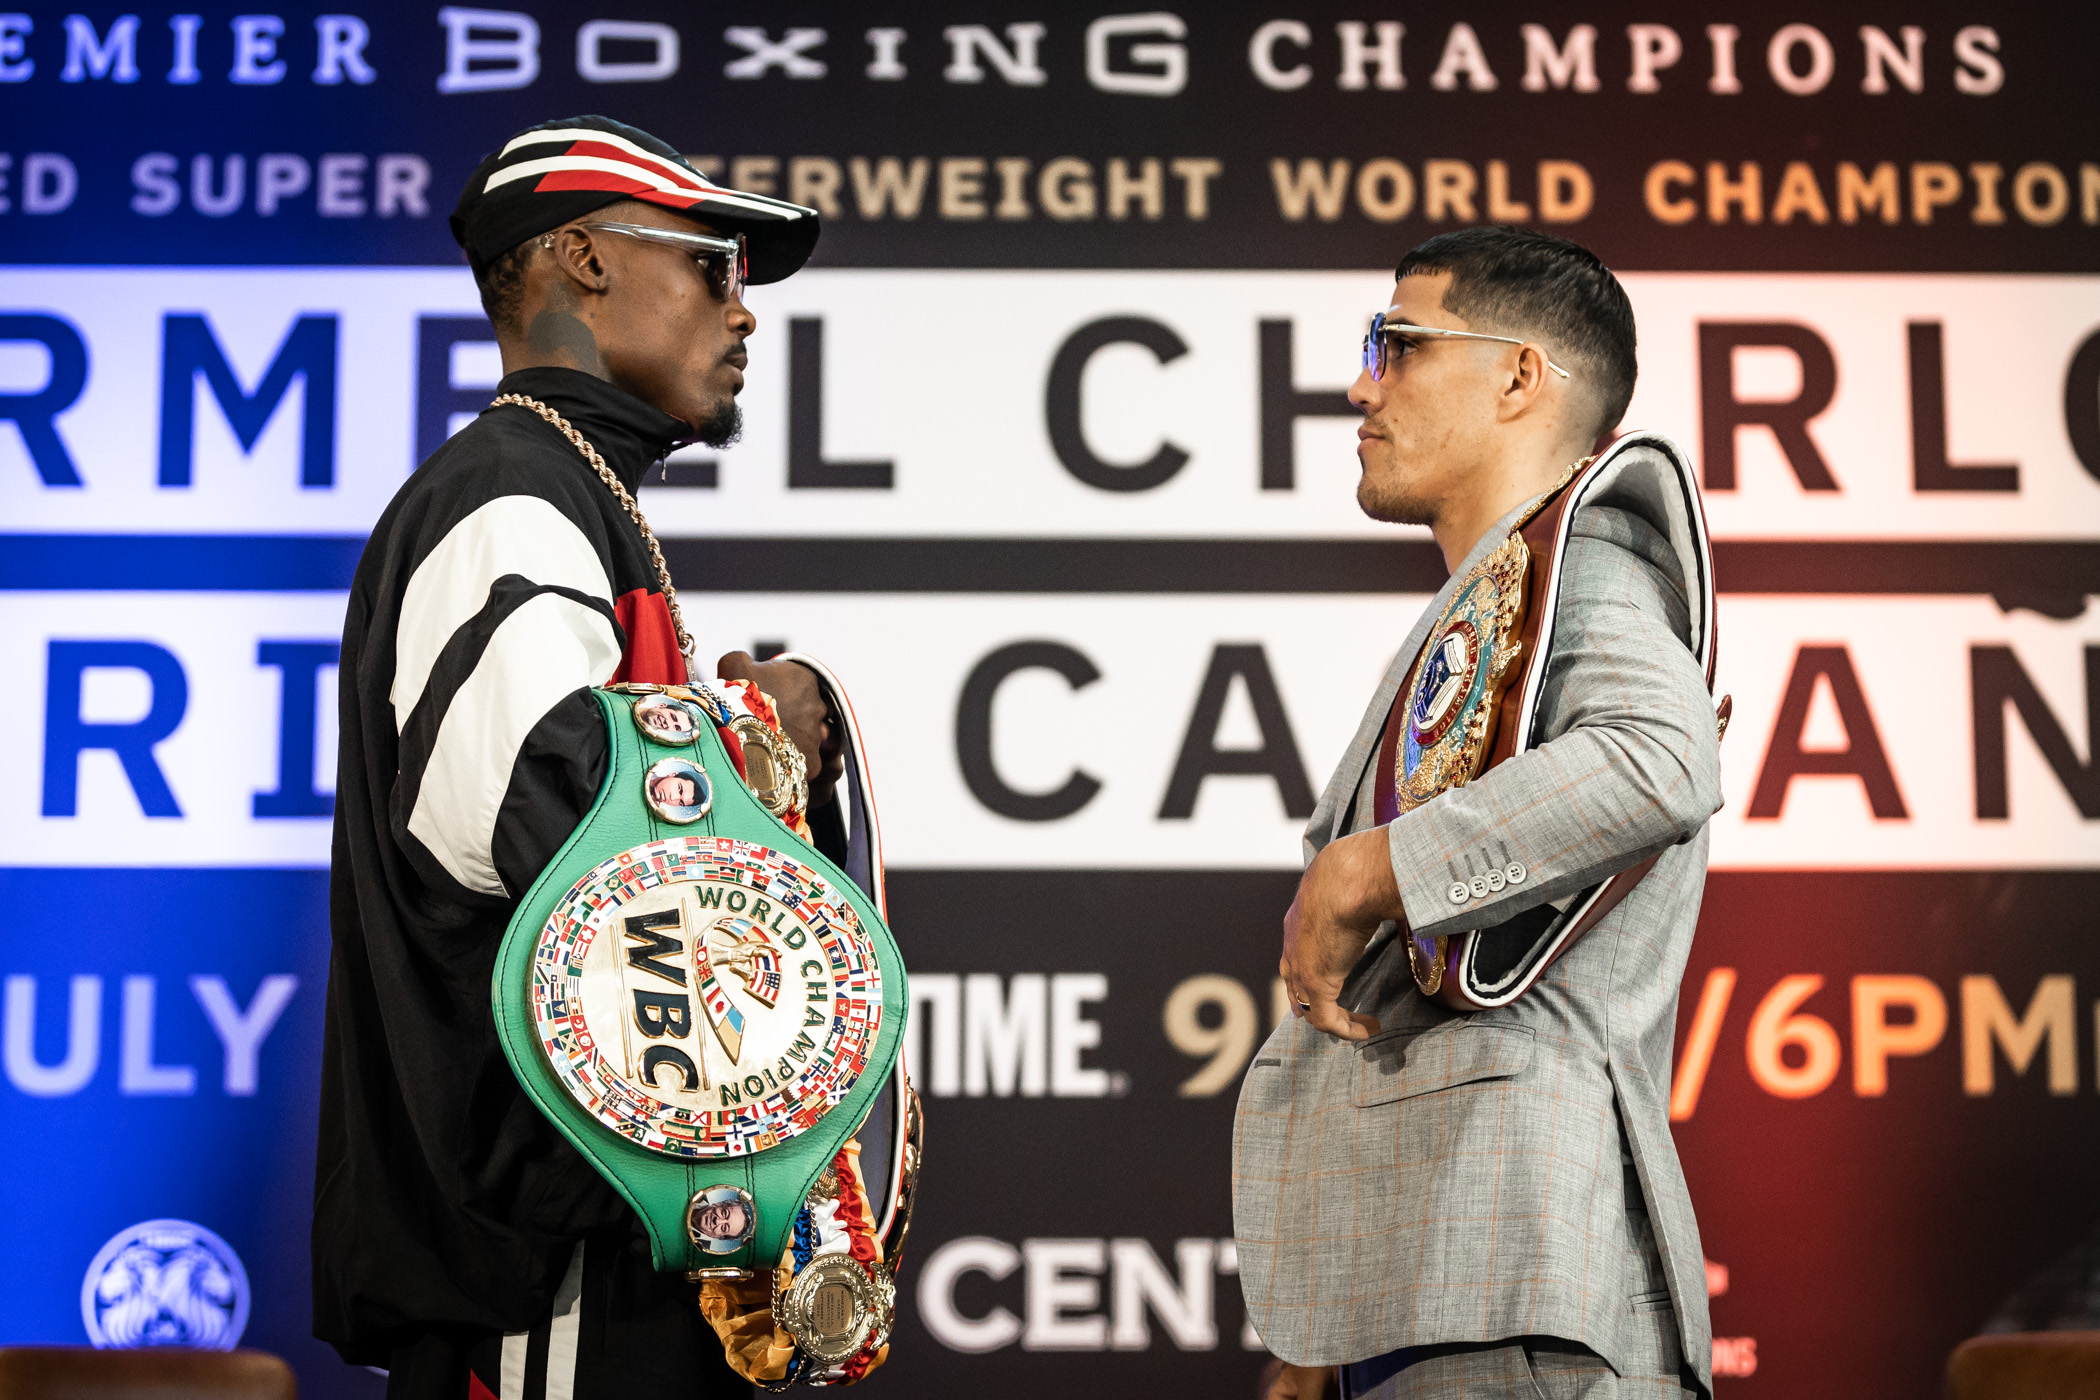 Jermell Charlo and Brian Castano meet again, who wins the rematch?